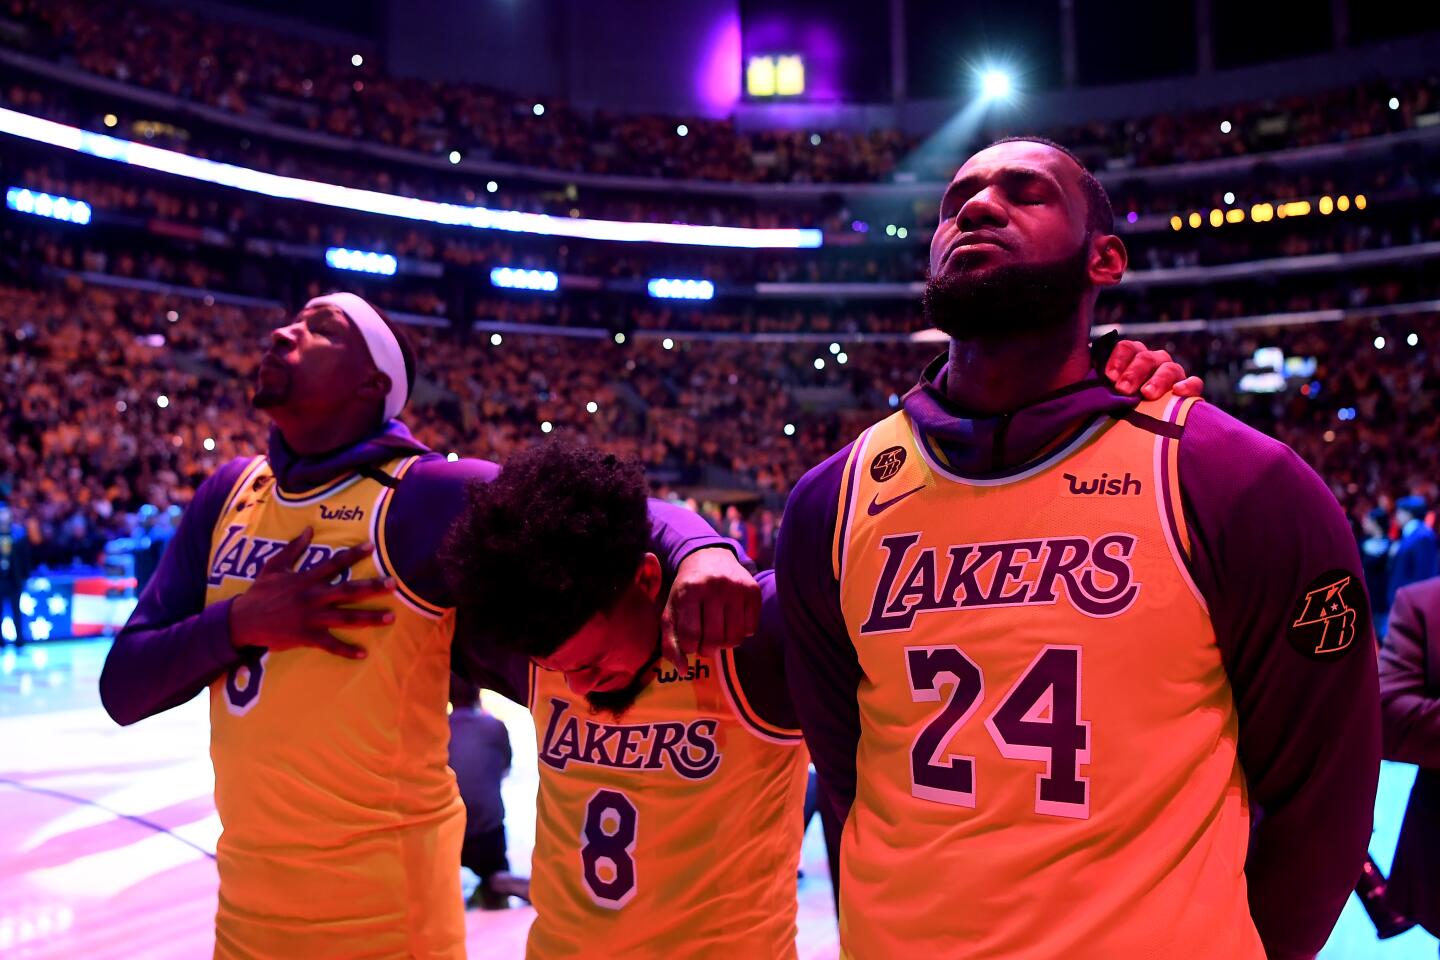 Kentavious Caldwell-Pope, Quinn Cook, and LeBron James close their eyes during a tribute to Kobe Bryant on Jan. 31 at Staples Center.